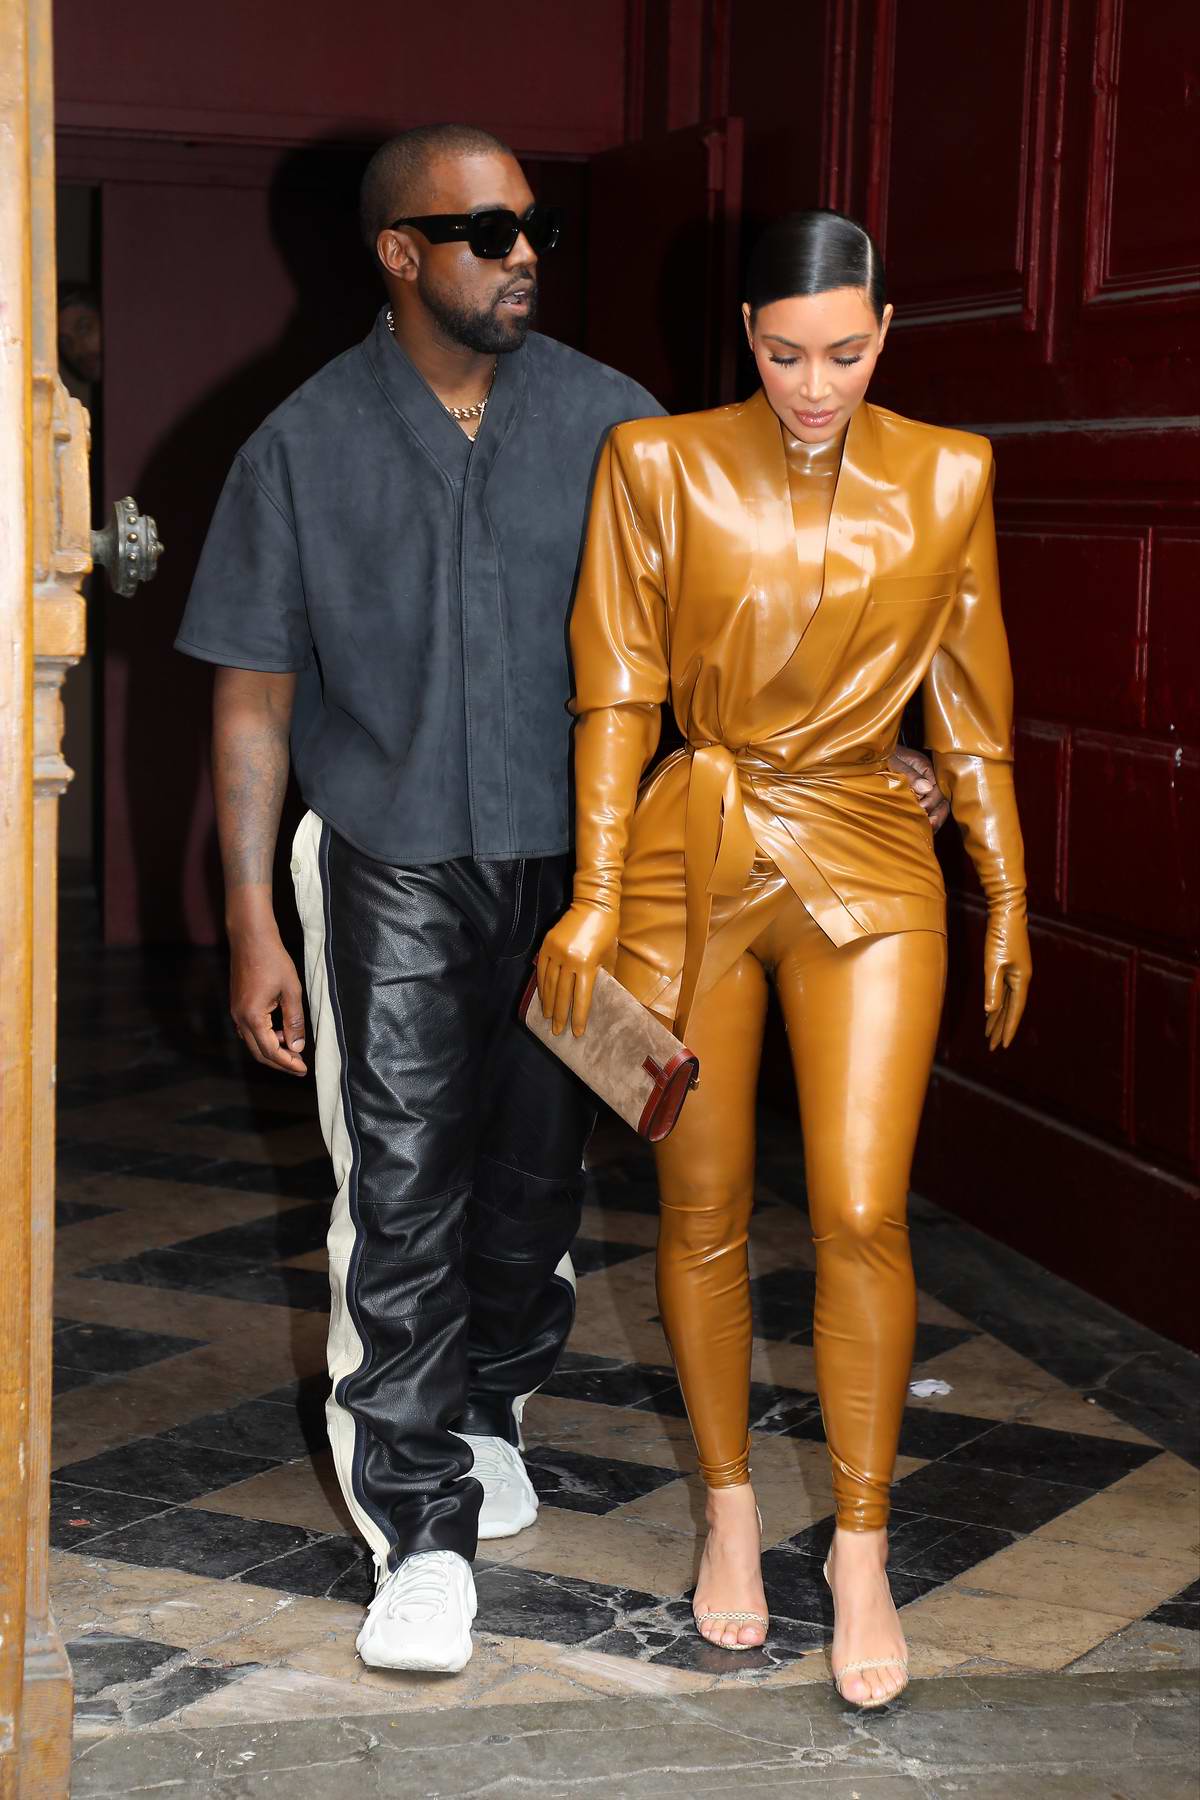 Kim Kardashian dons Balmain latex outfit as she steps out after